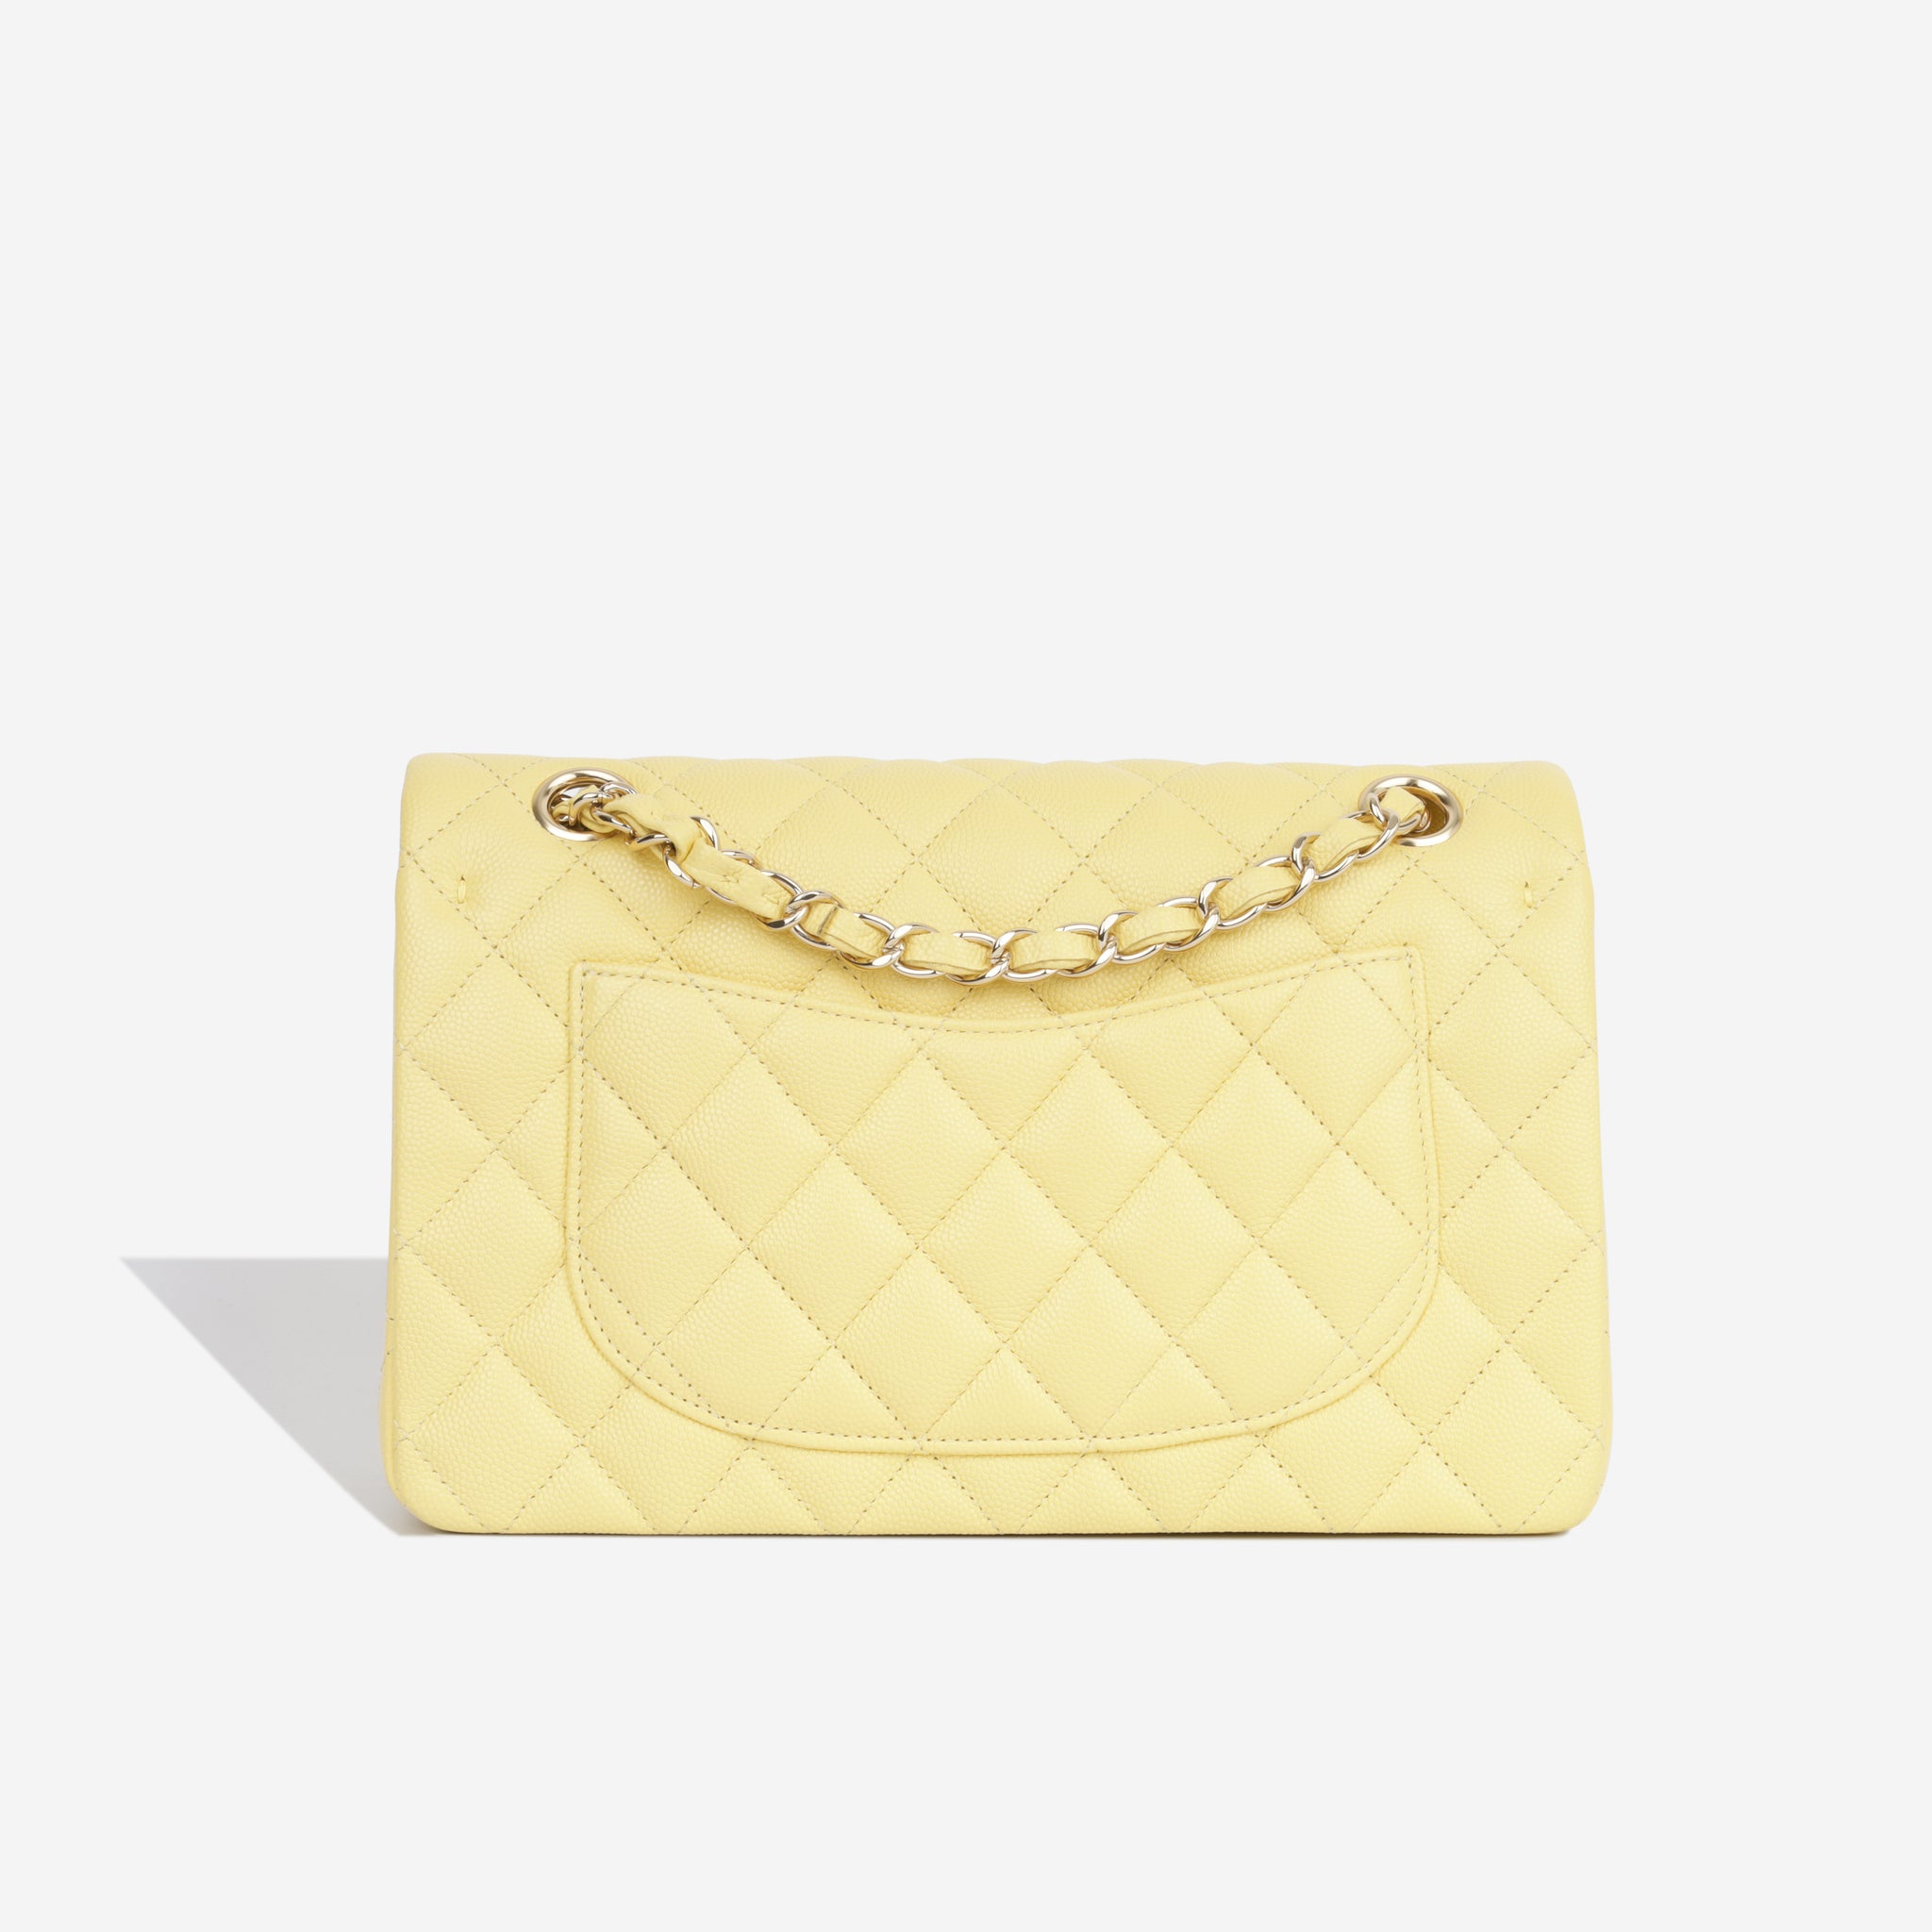 CHANEL Medium Classic Double Flap Bag in 19S Iridescent Yellow Caviar   Dearluxe